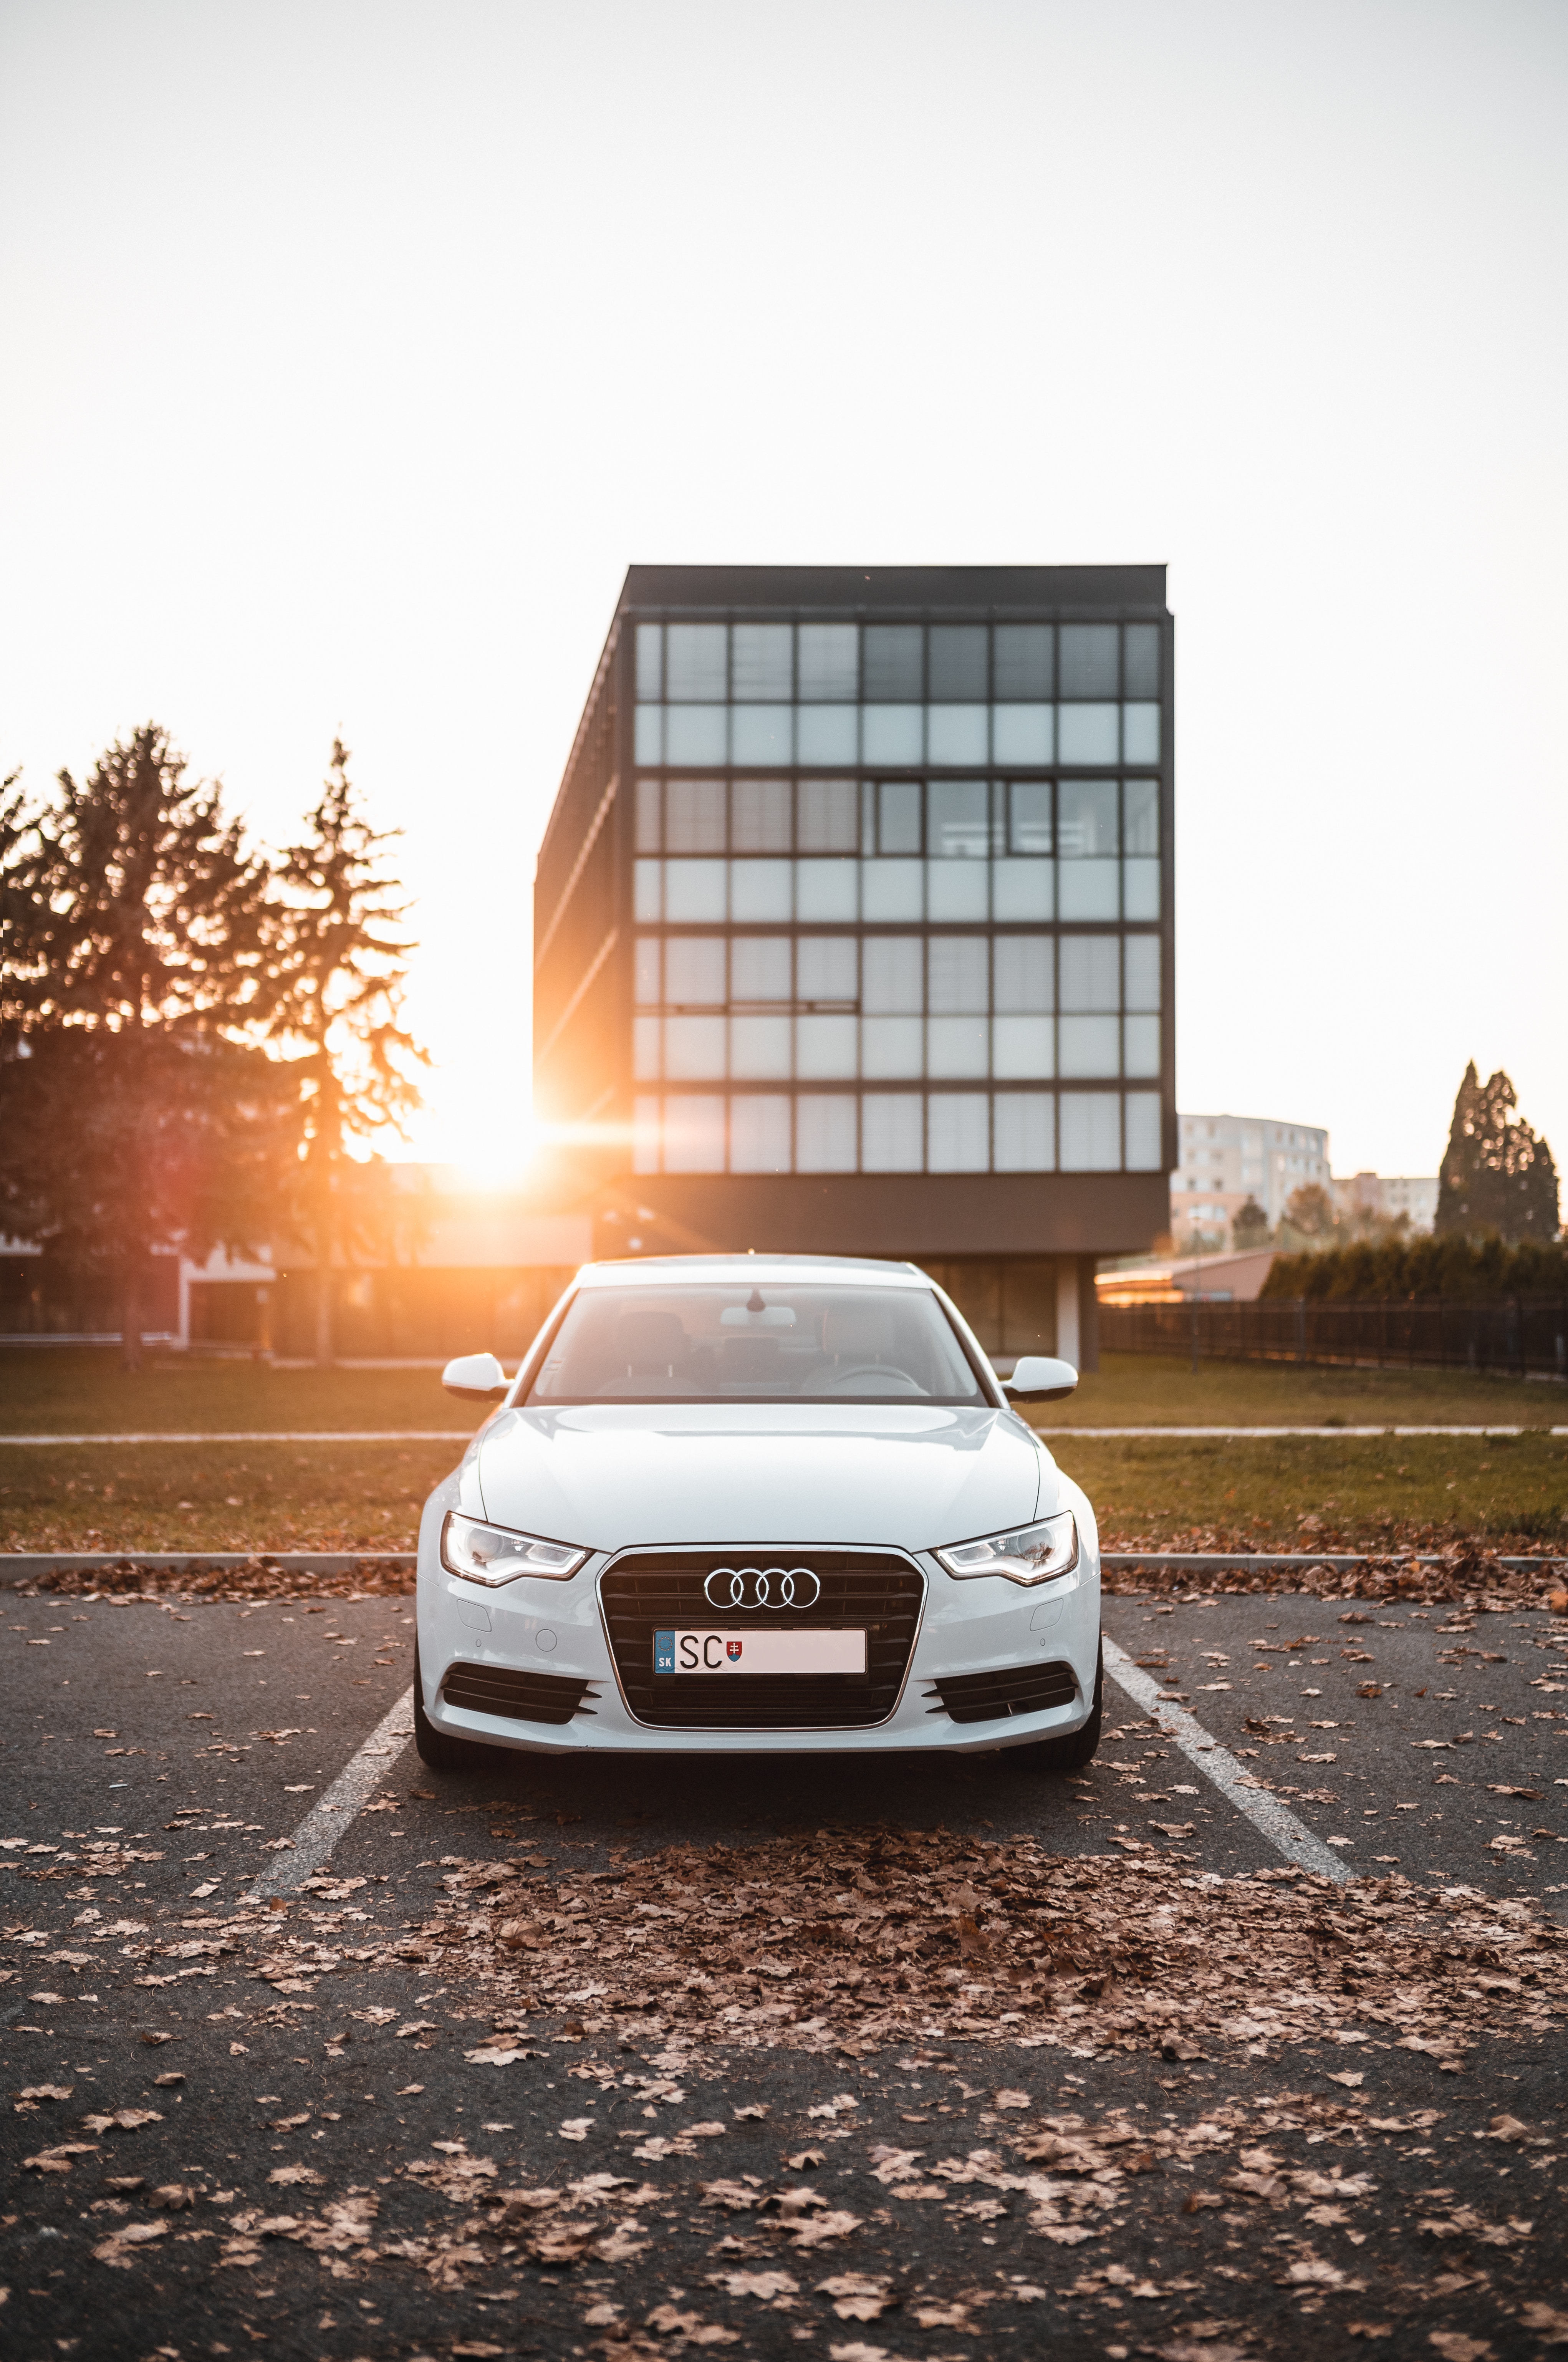 Mobile wallpaper: Audi A7, Audi, Car, Sunlight, Machine, Front View, Cars,  130464 download the picture for free.